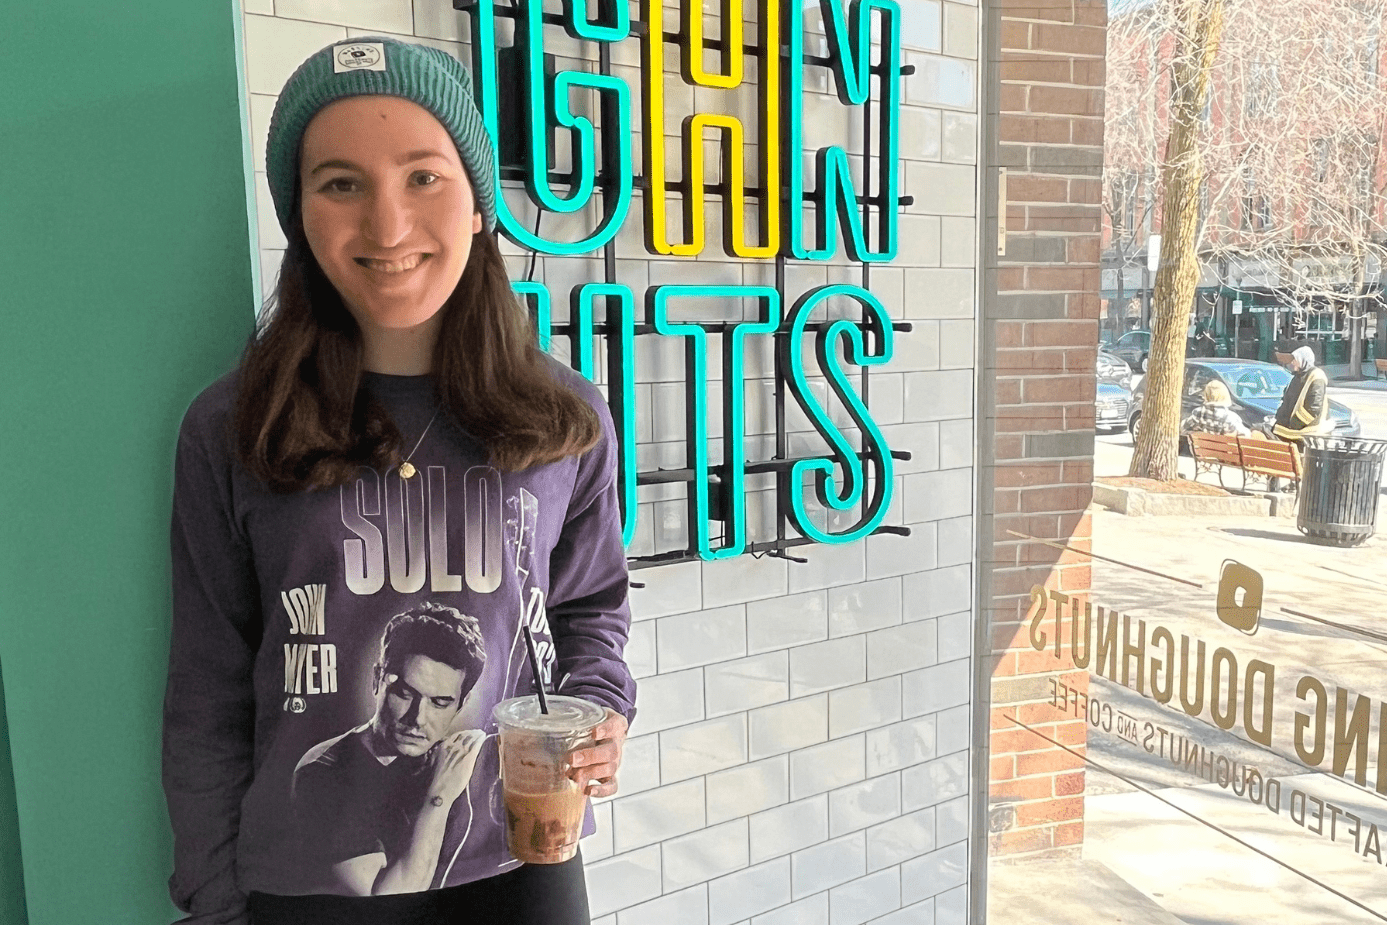 Local foodie and ¼ϲʿ student Sarah Libov ‘24 sheds some light on what your favorite Saratoga coffee shop might say about you.